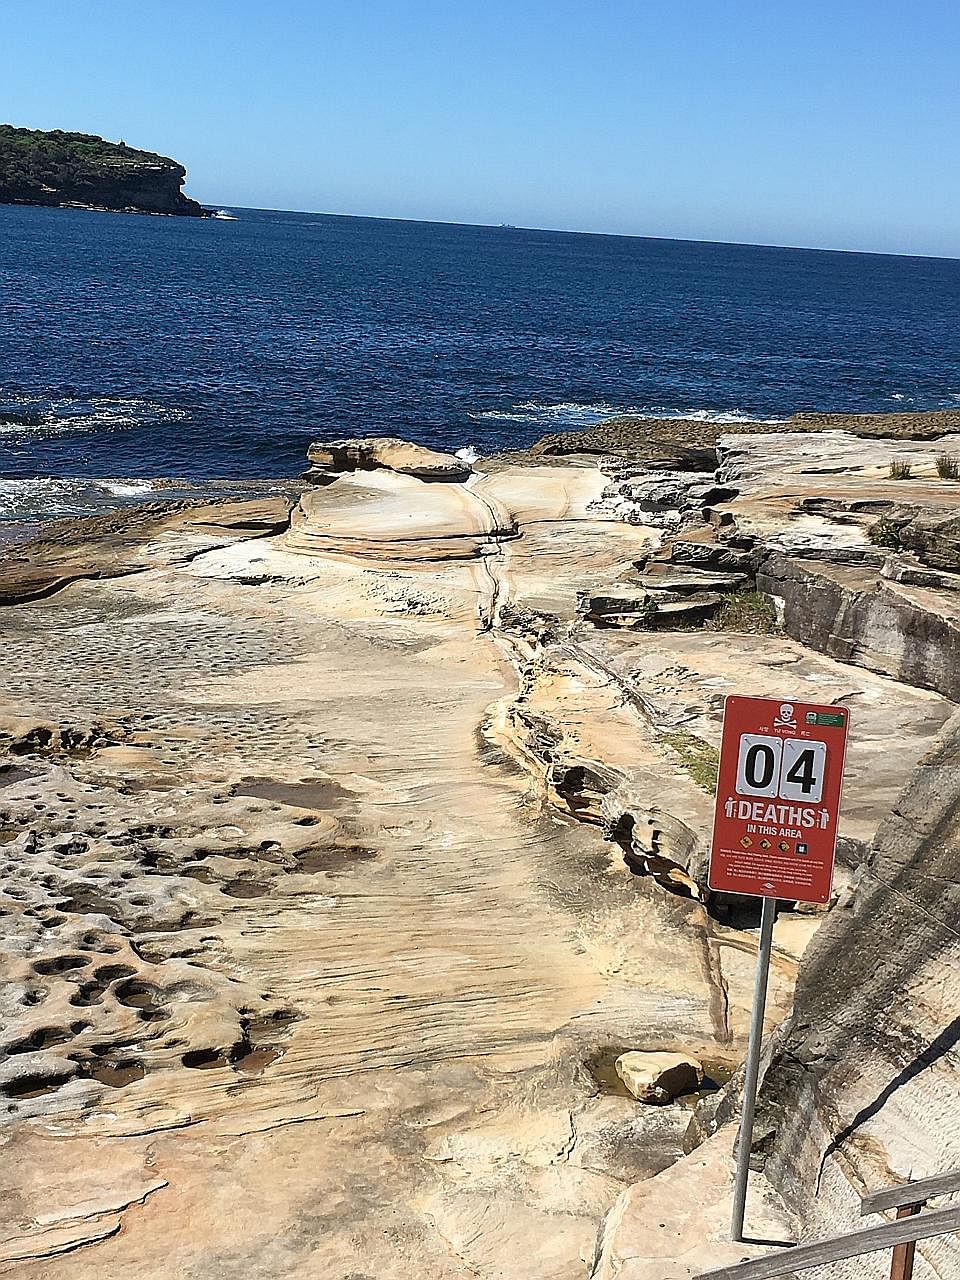 The rock-fishing "death scoreboard" in the suburb of La Perouse installed by the Randwick council in Sydney. Four fishermen have drowned in that spot in the past 10 years. Australia's coastline is dotted with many notorious death spots, where several